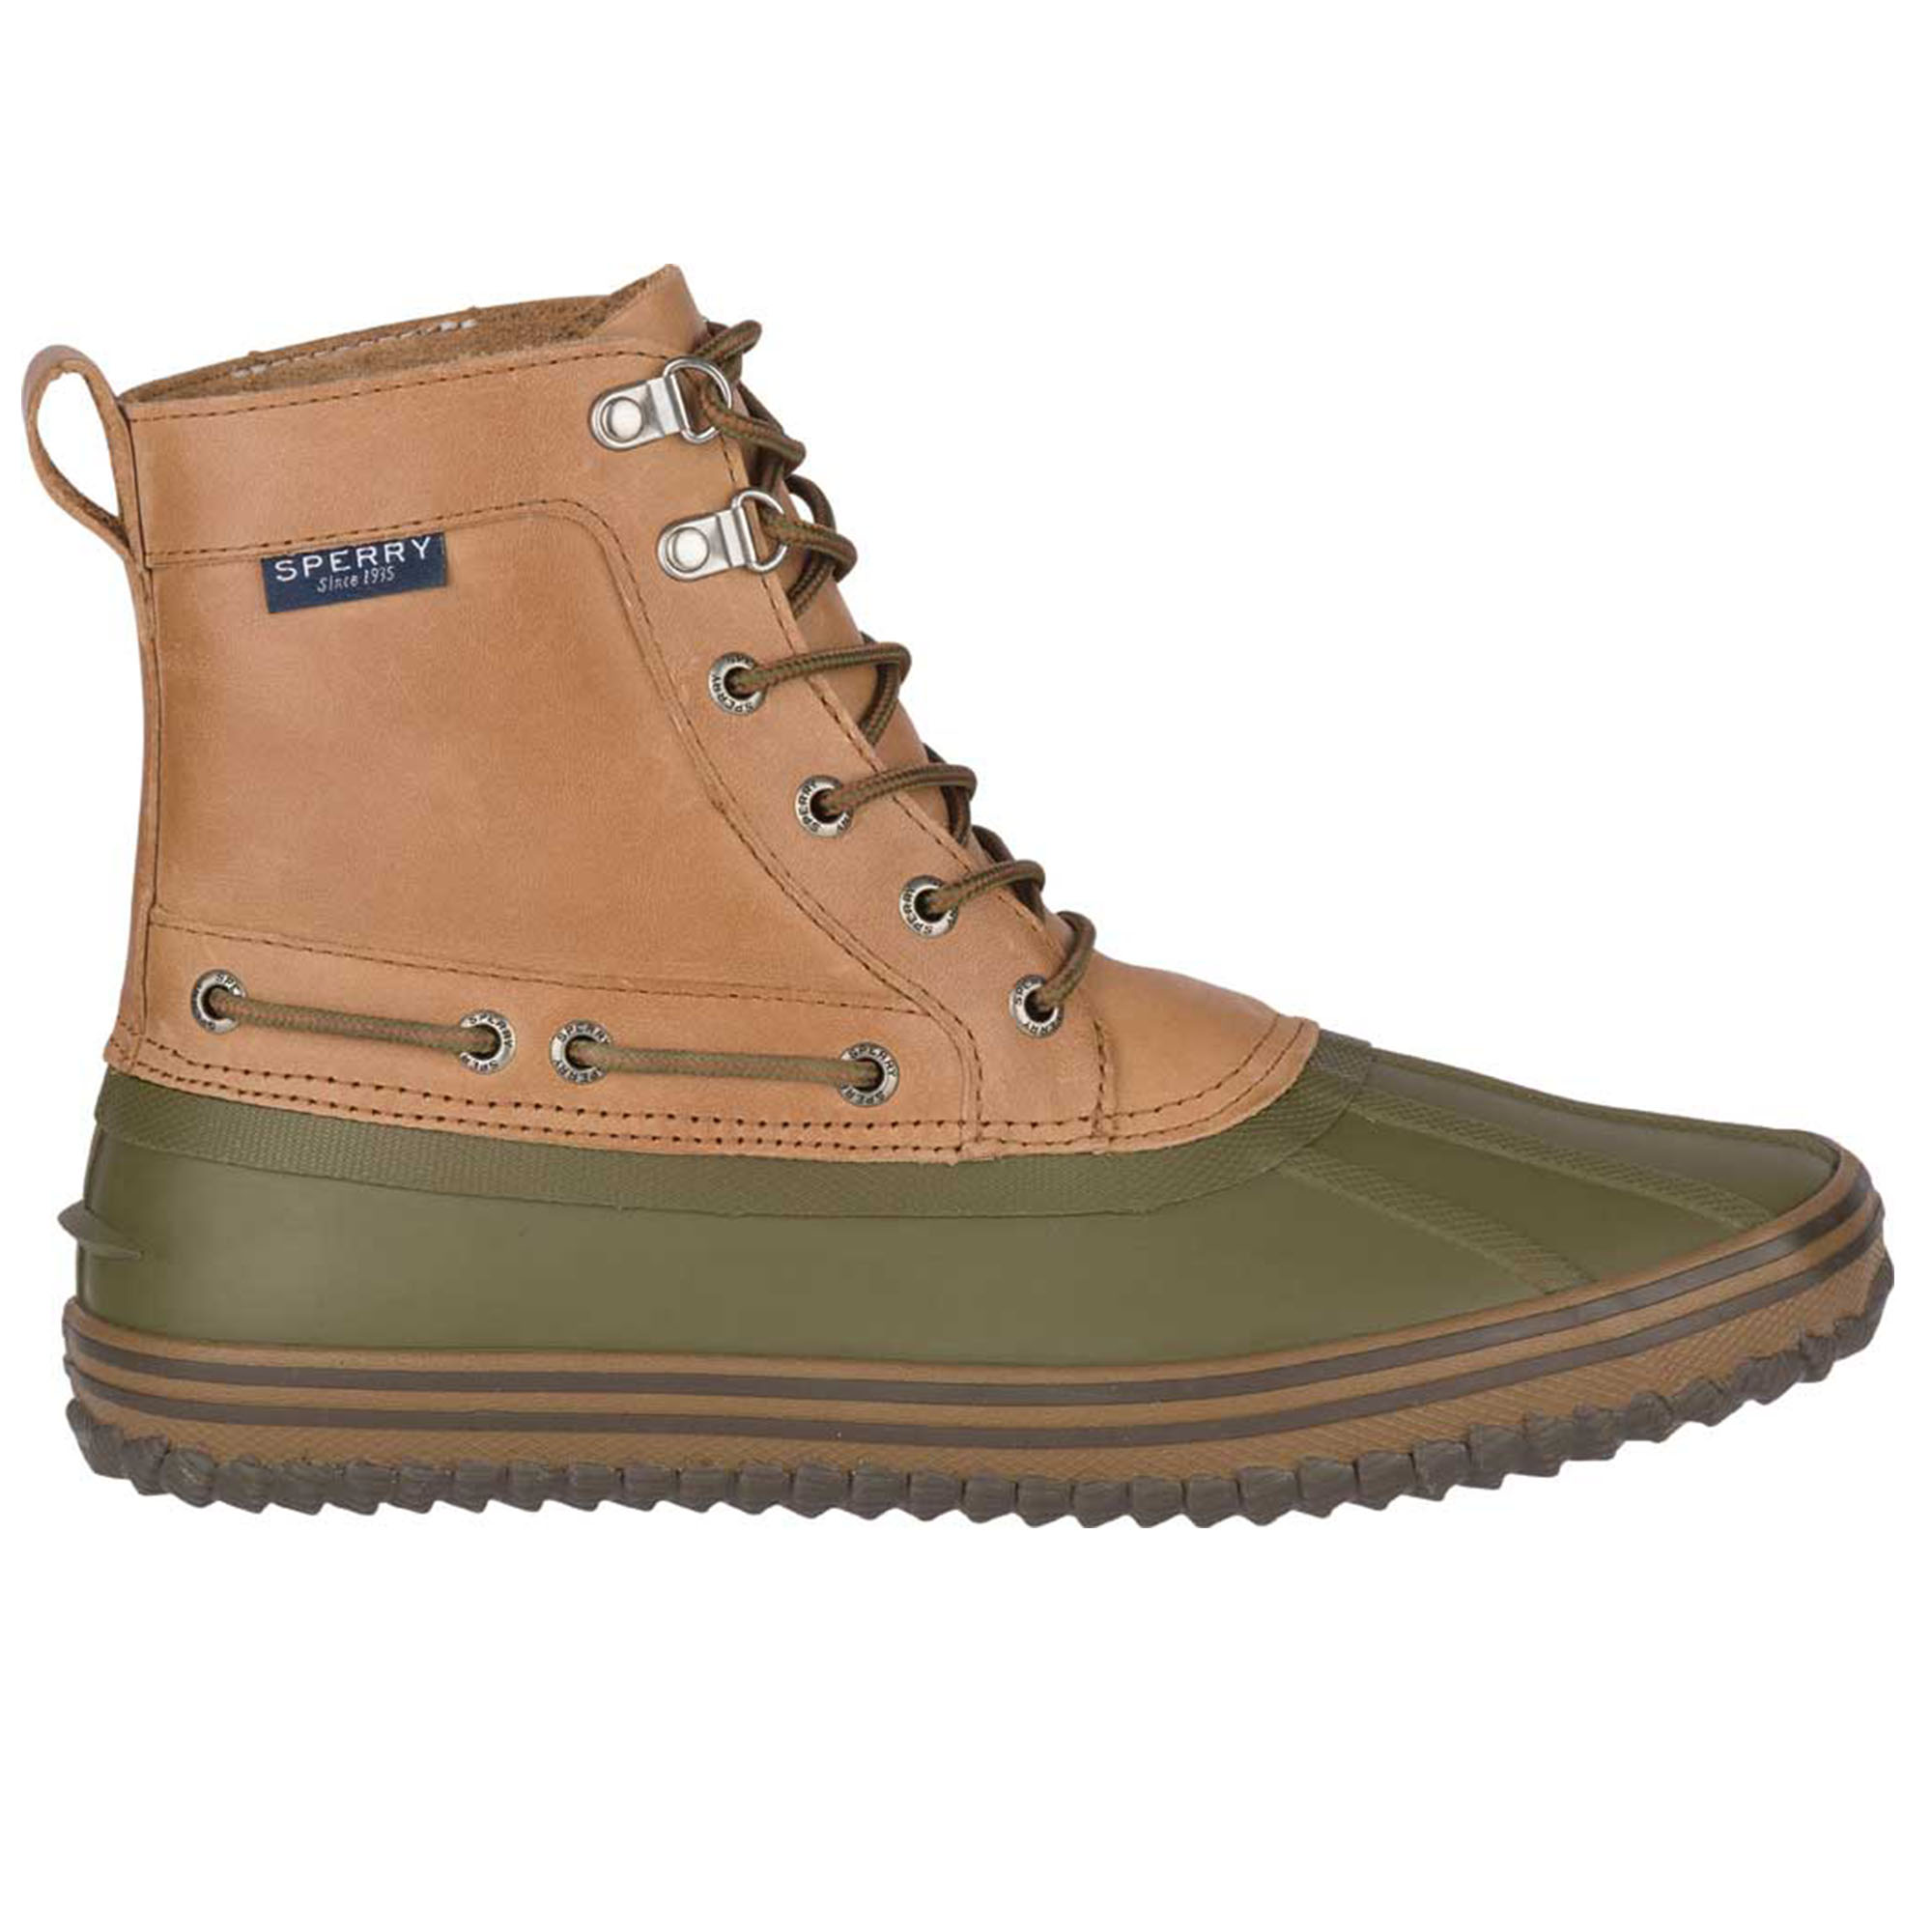 sperry hiking boots